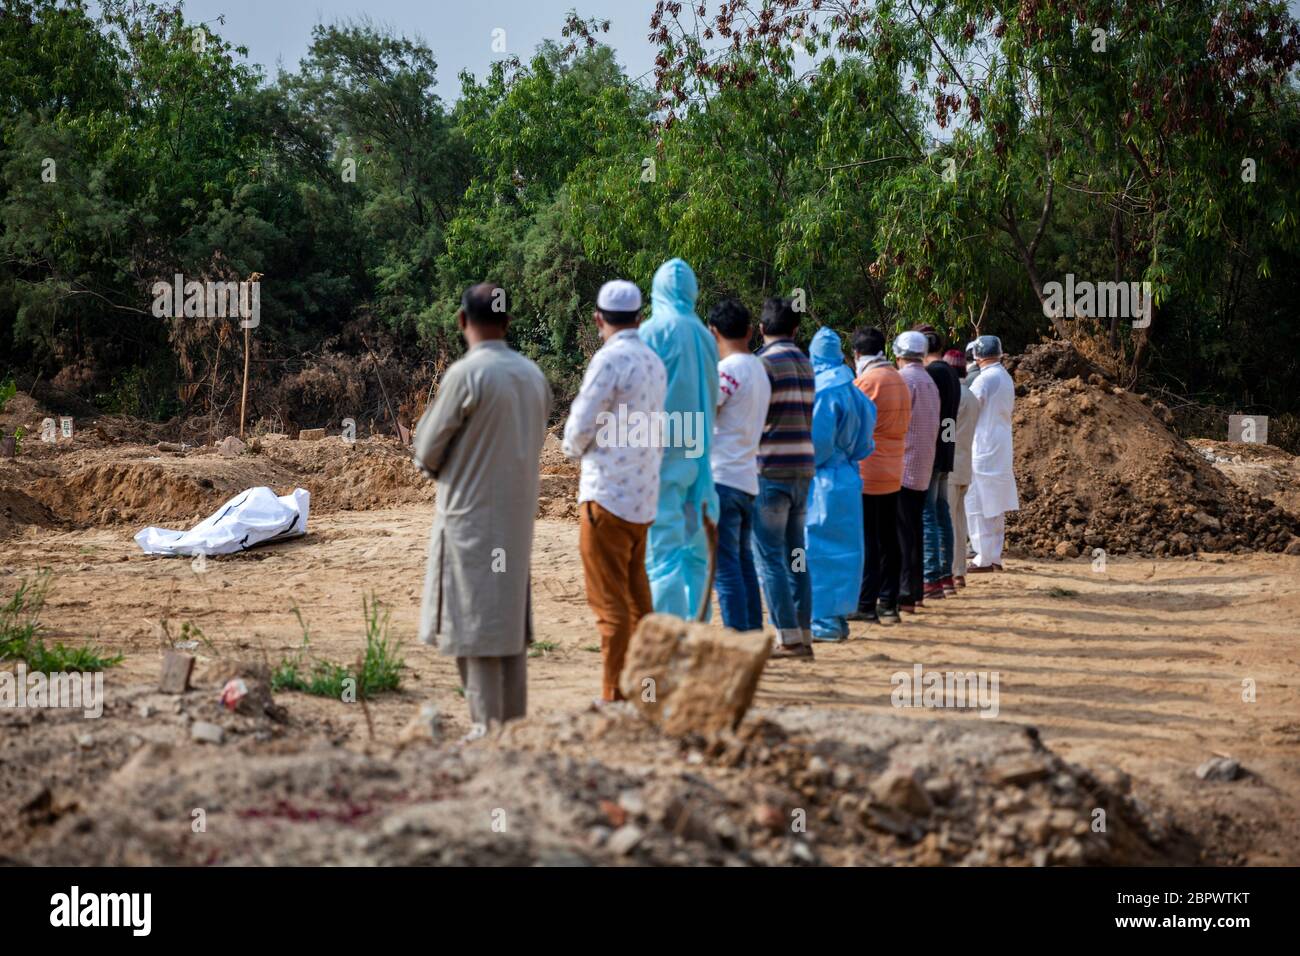 Relatives offering their last prayer at a graveyard, as the country relaxed its lockdown restriction on May 13, 2020 in New Delhi, India. Photographer: Kuldeep Singh Rohilla Stock Photo